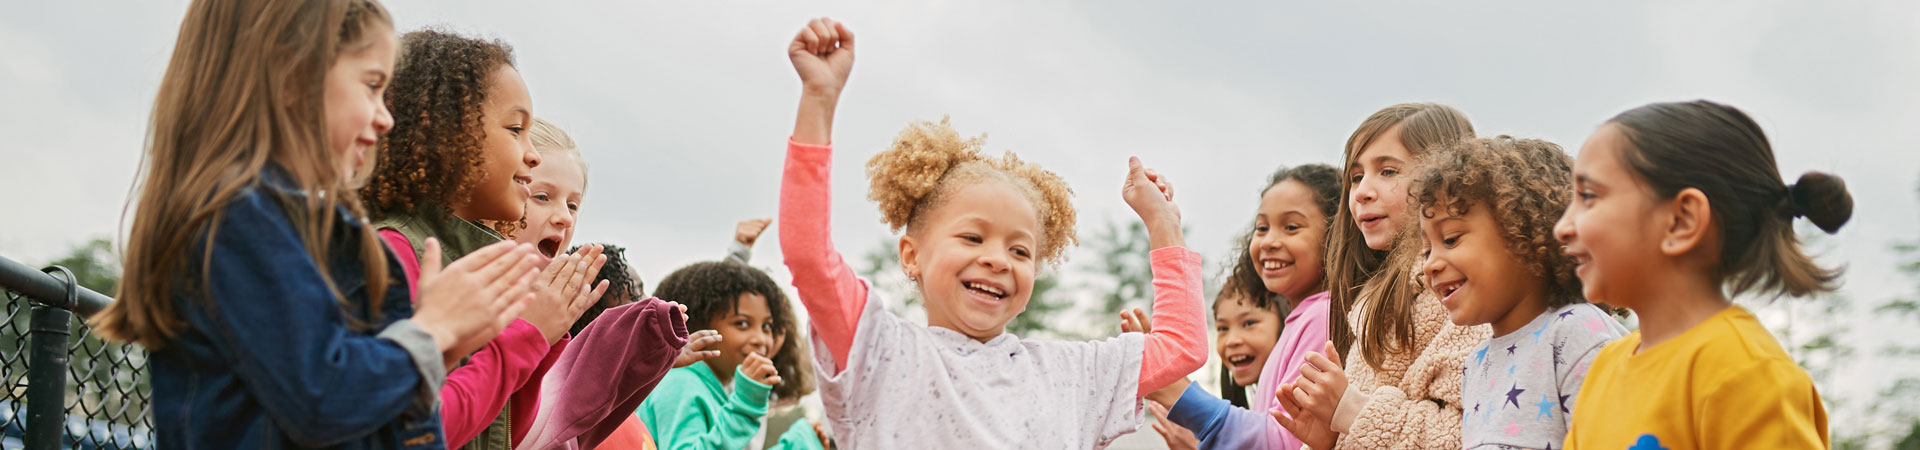  Girl Scout with pigtails raises arms as she runs through a crowd of kids outside on a running track. 